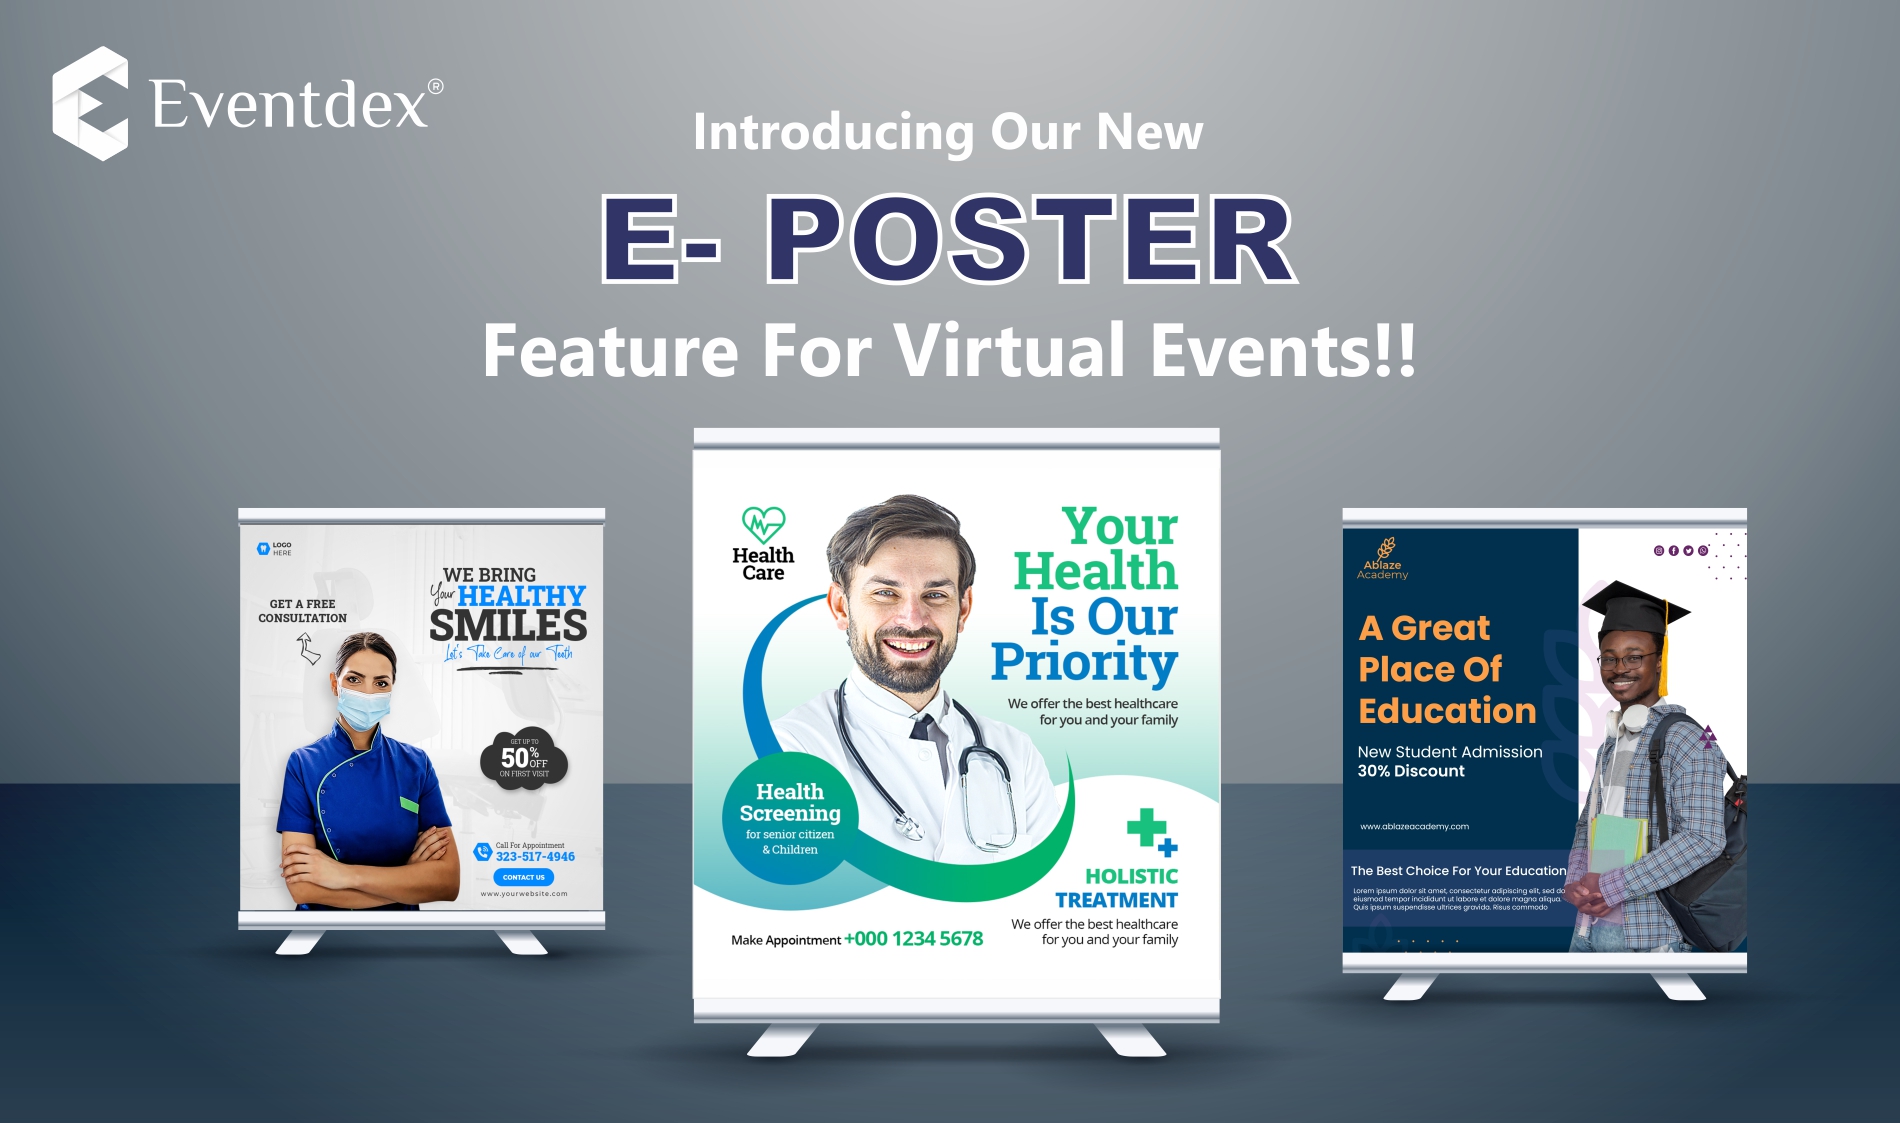 Eventdex Launches Poster Walk Feature for Virtual Events